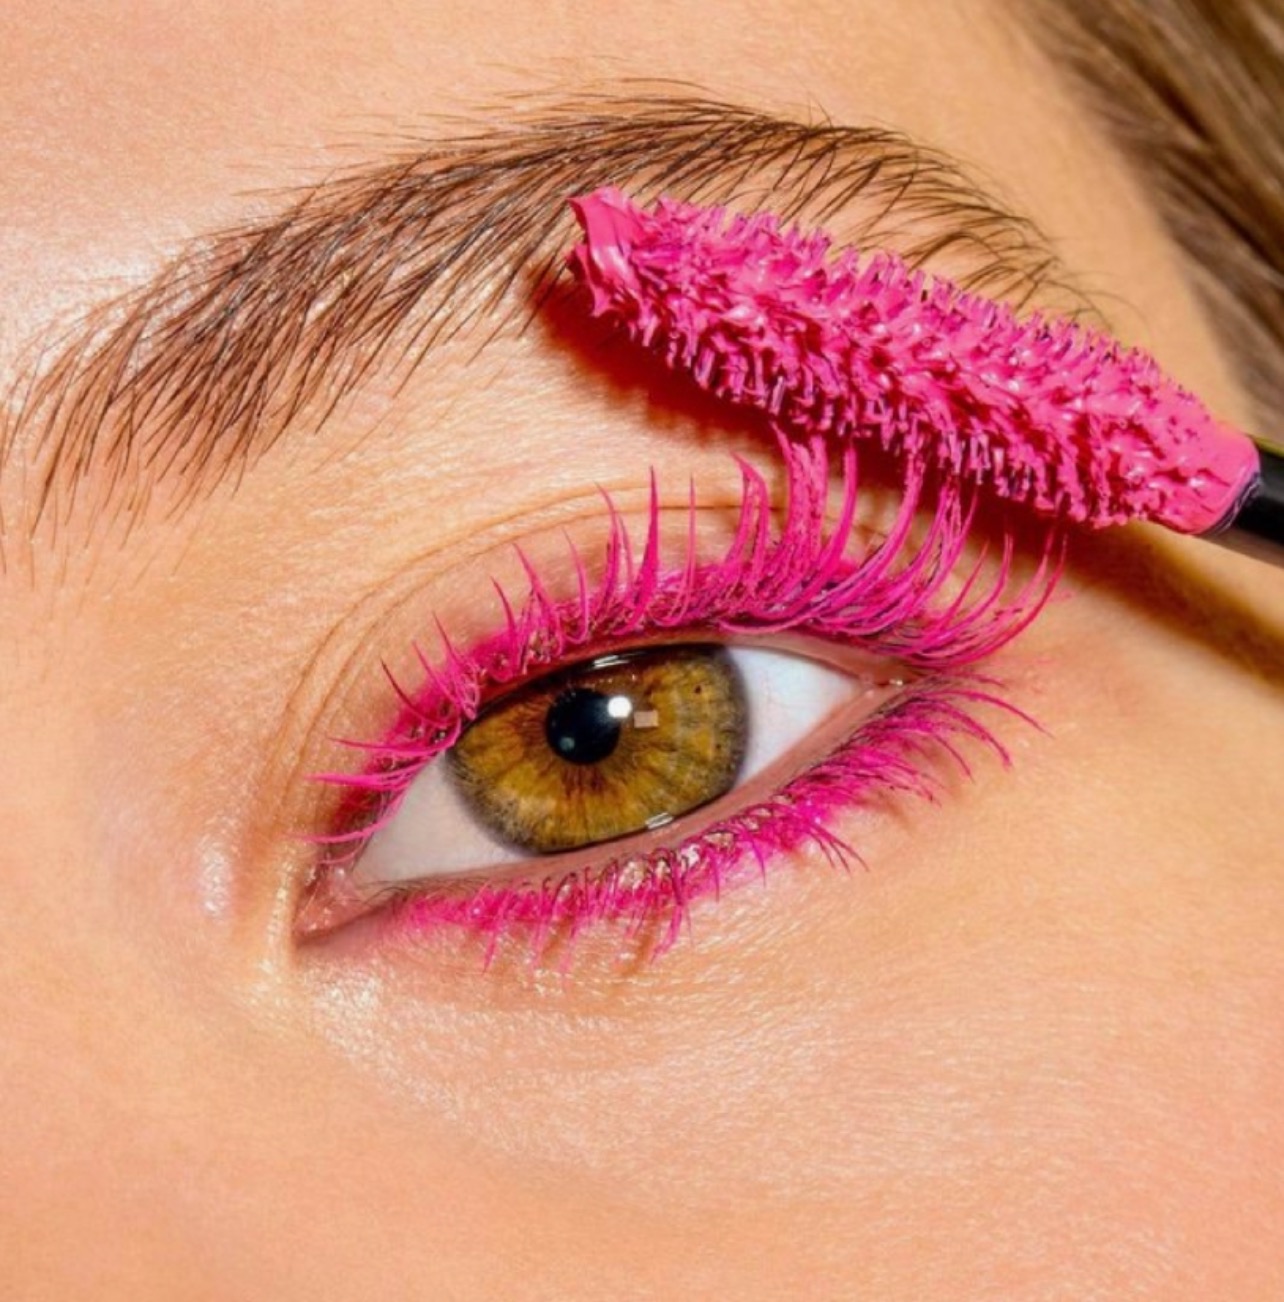 10 Bomb Beauty Products You Should Know About That Will Take Your Fall Glam To The Next Level